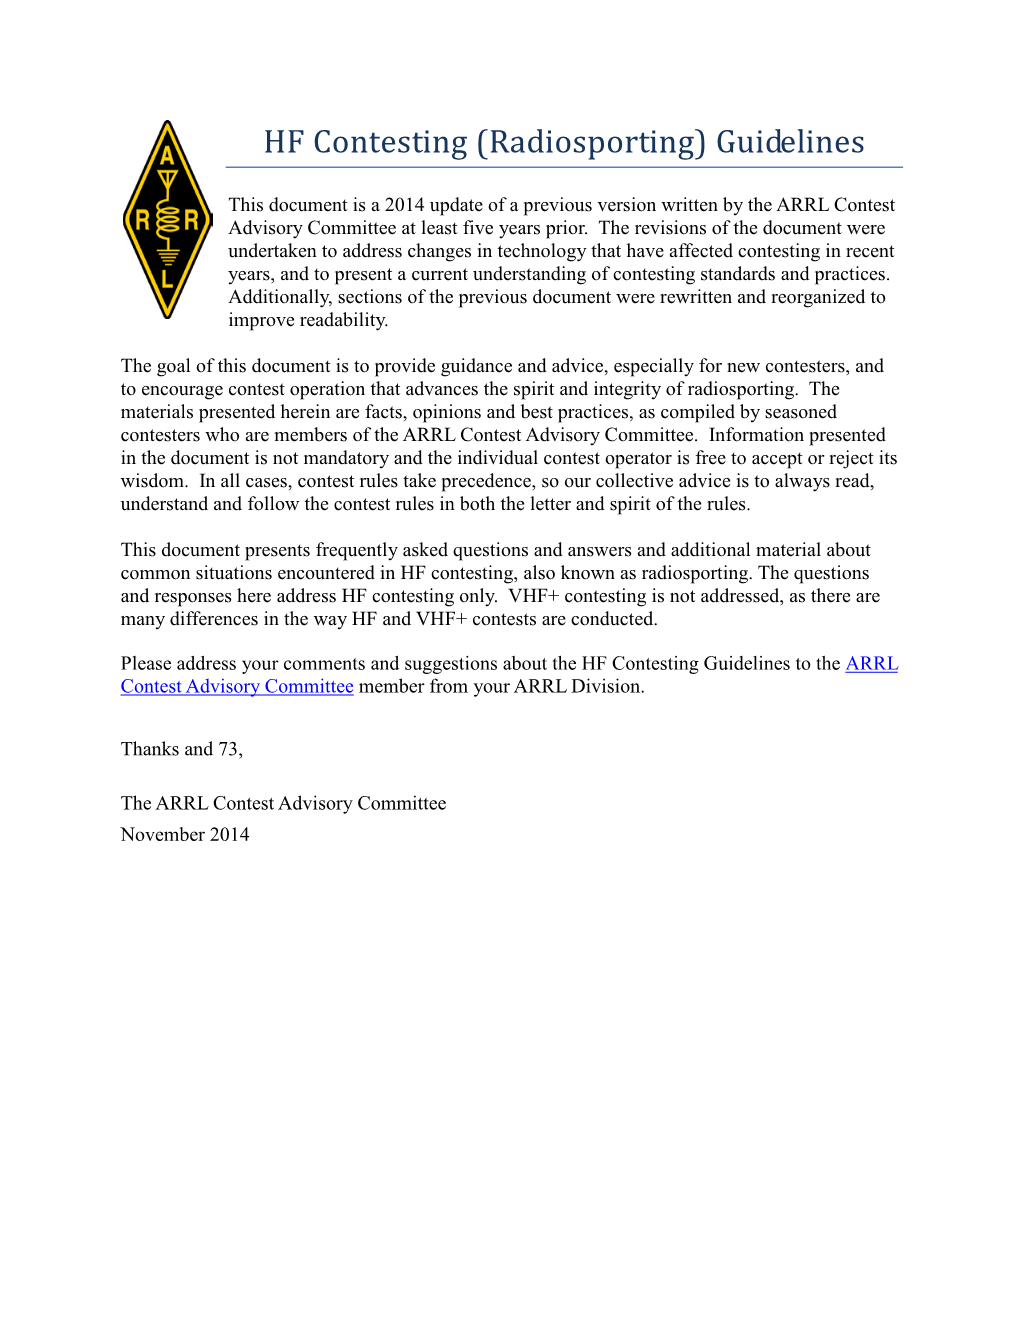 HF Contesting Guidelines to the ARRL Contest Advisory Committee Member from Your ARRL Division